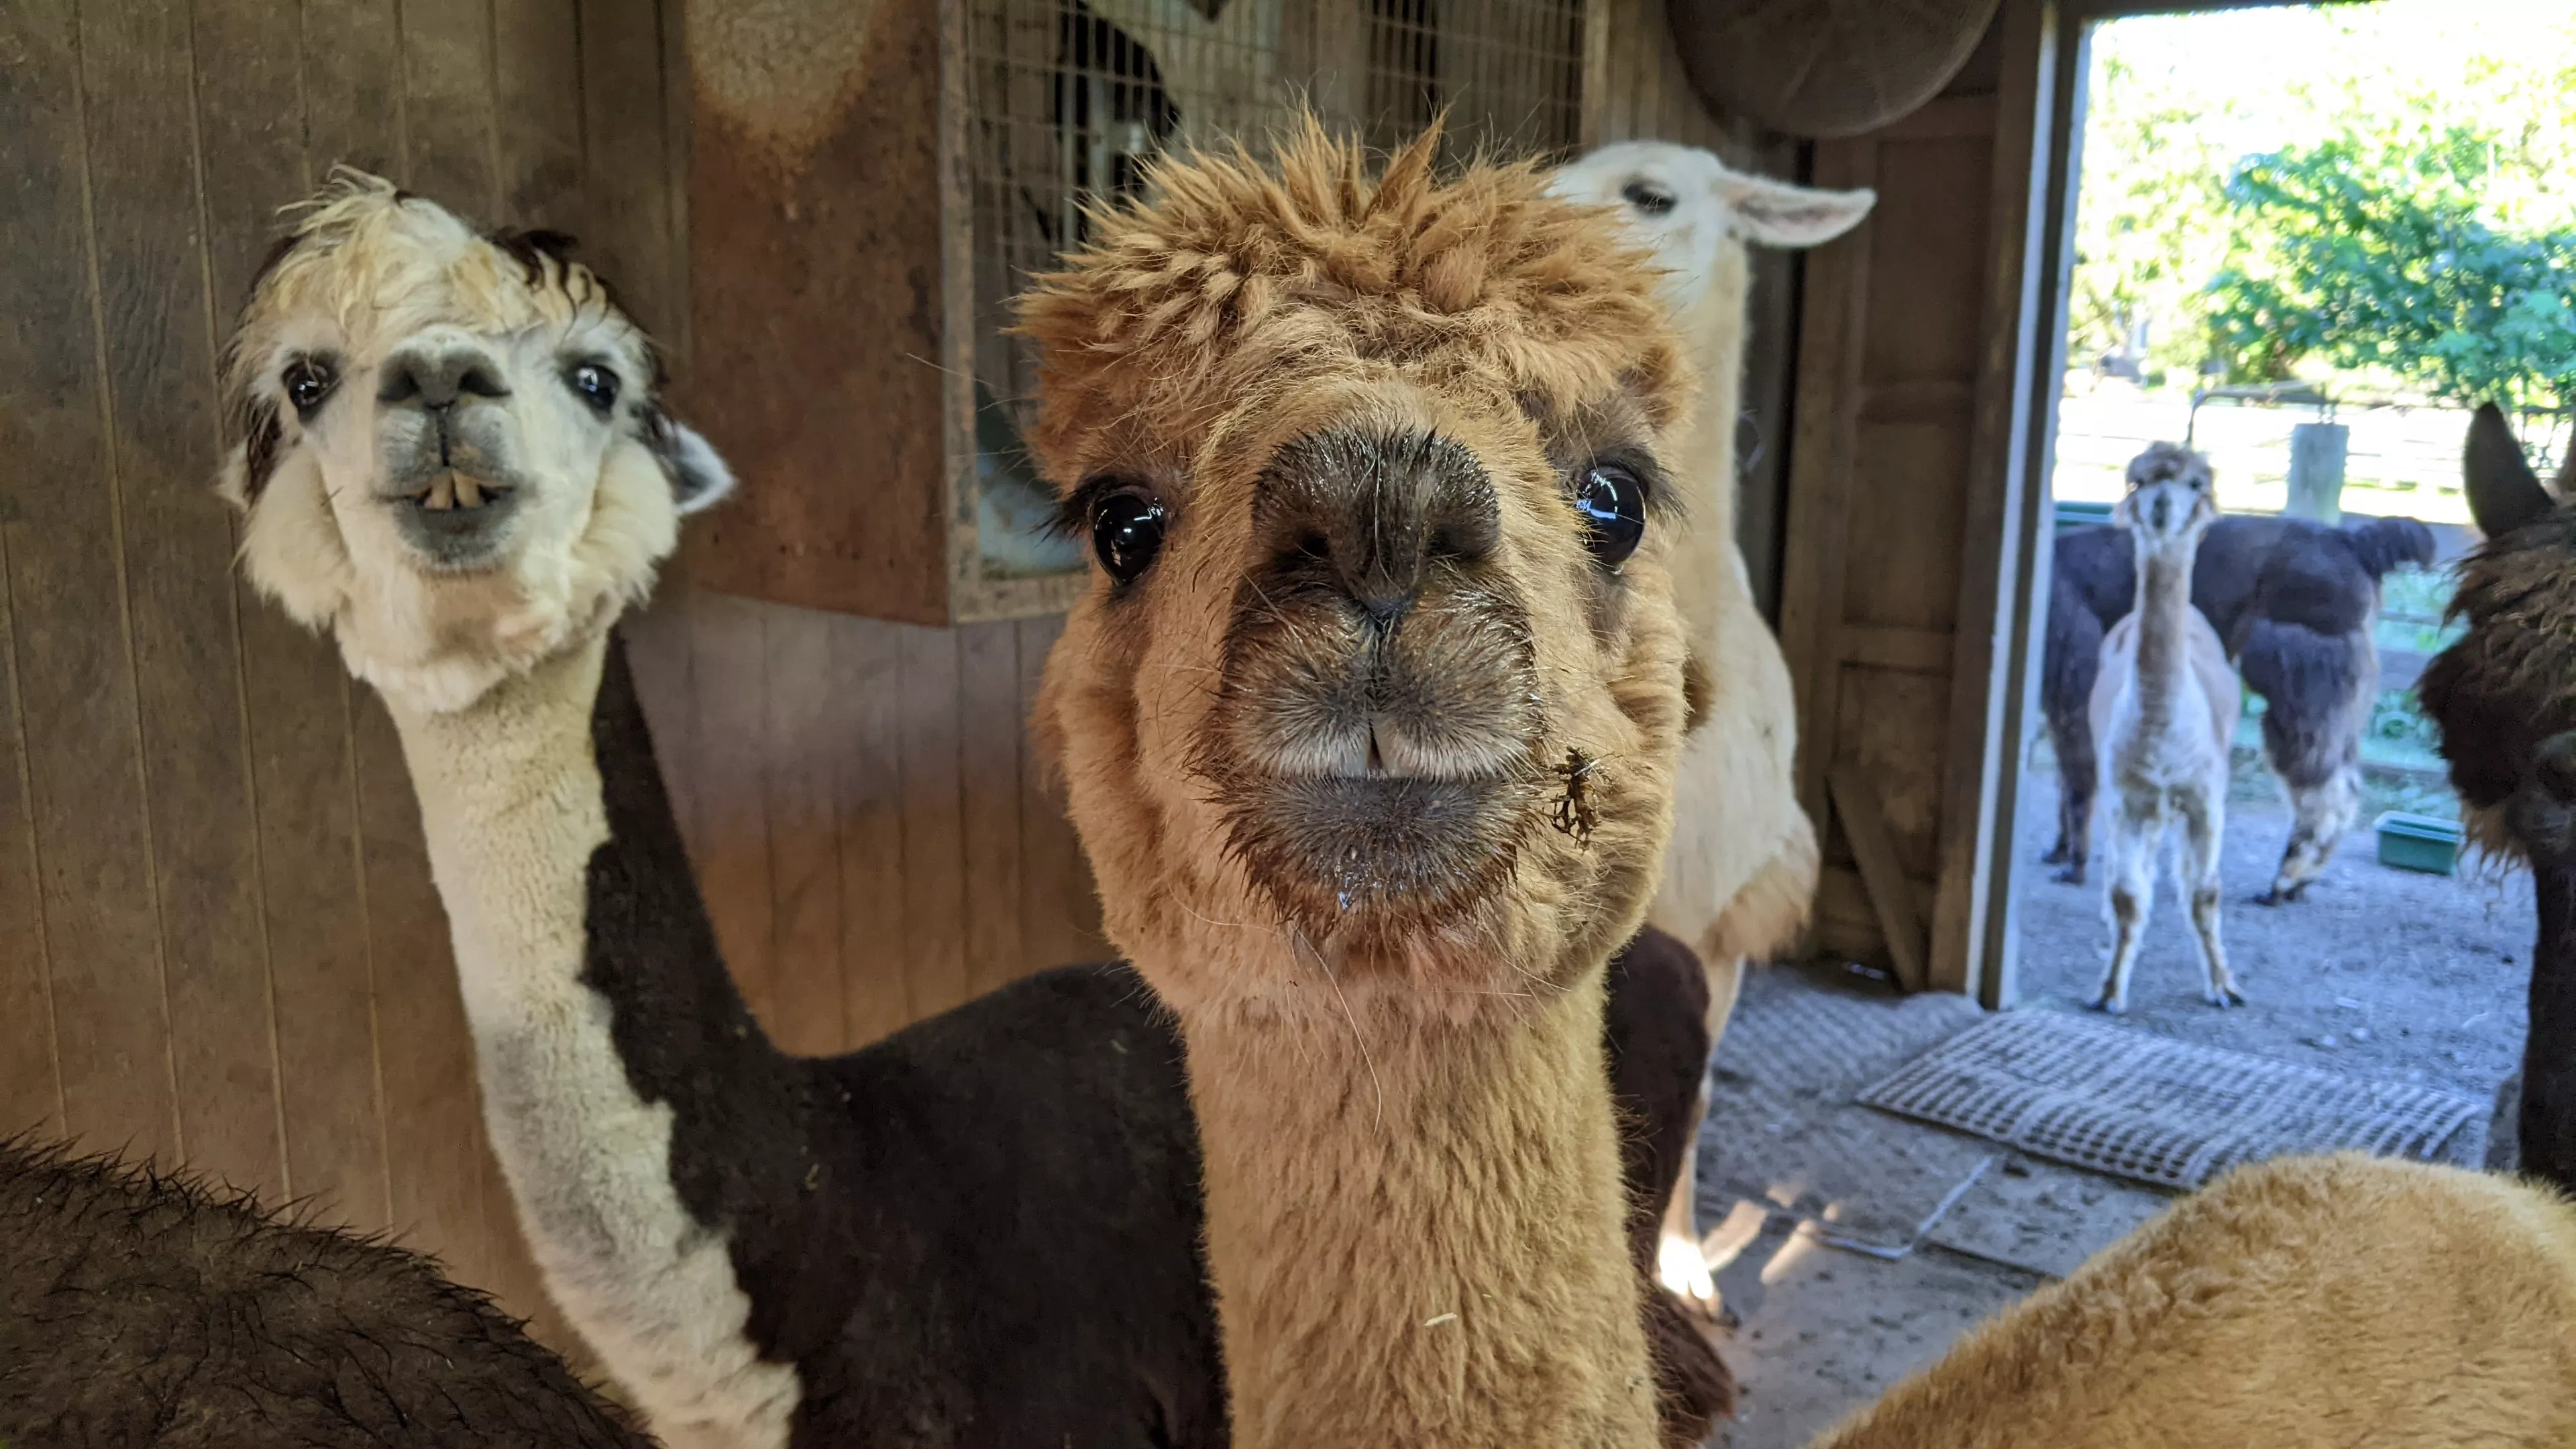 An image of an alpaca named Clare in the barn